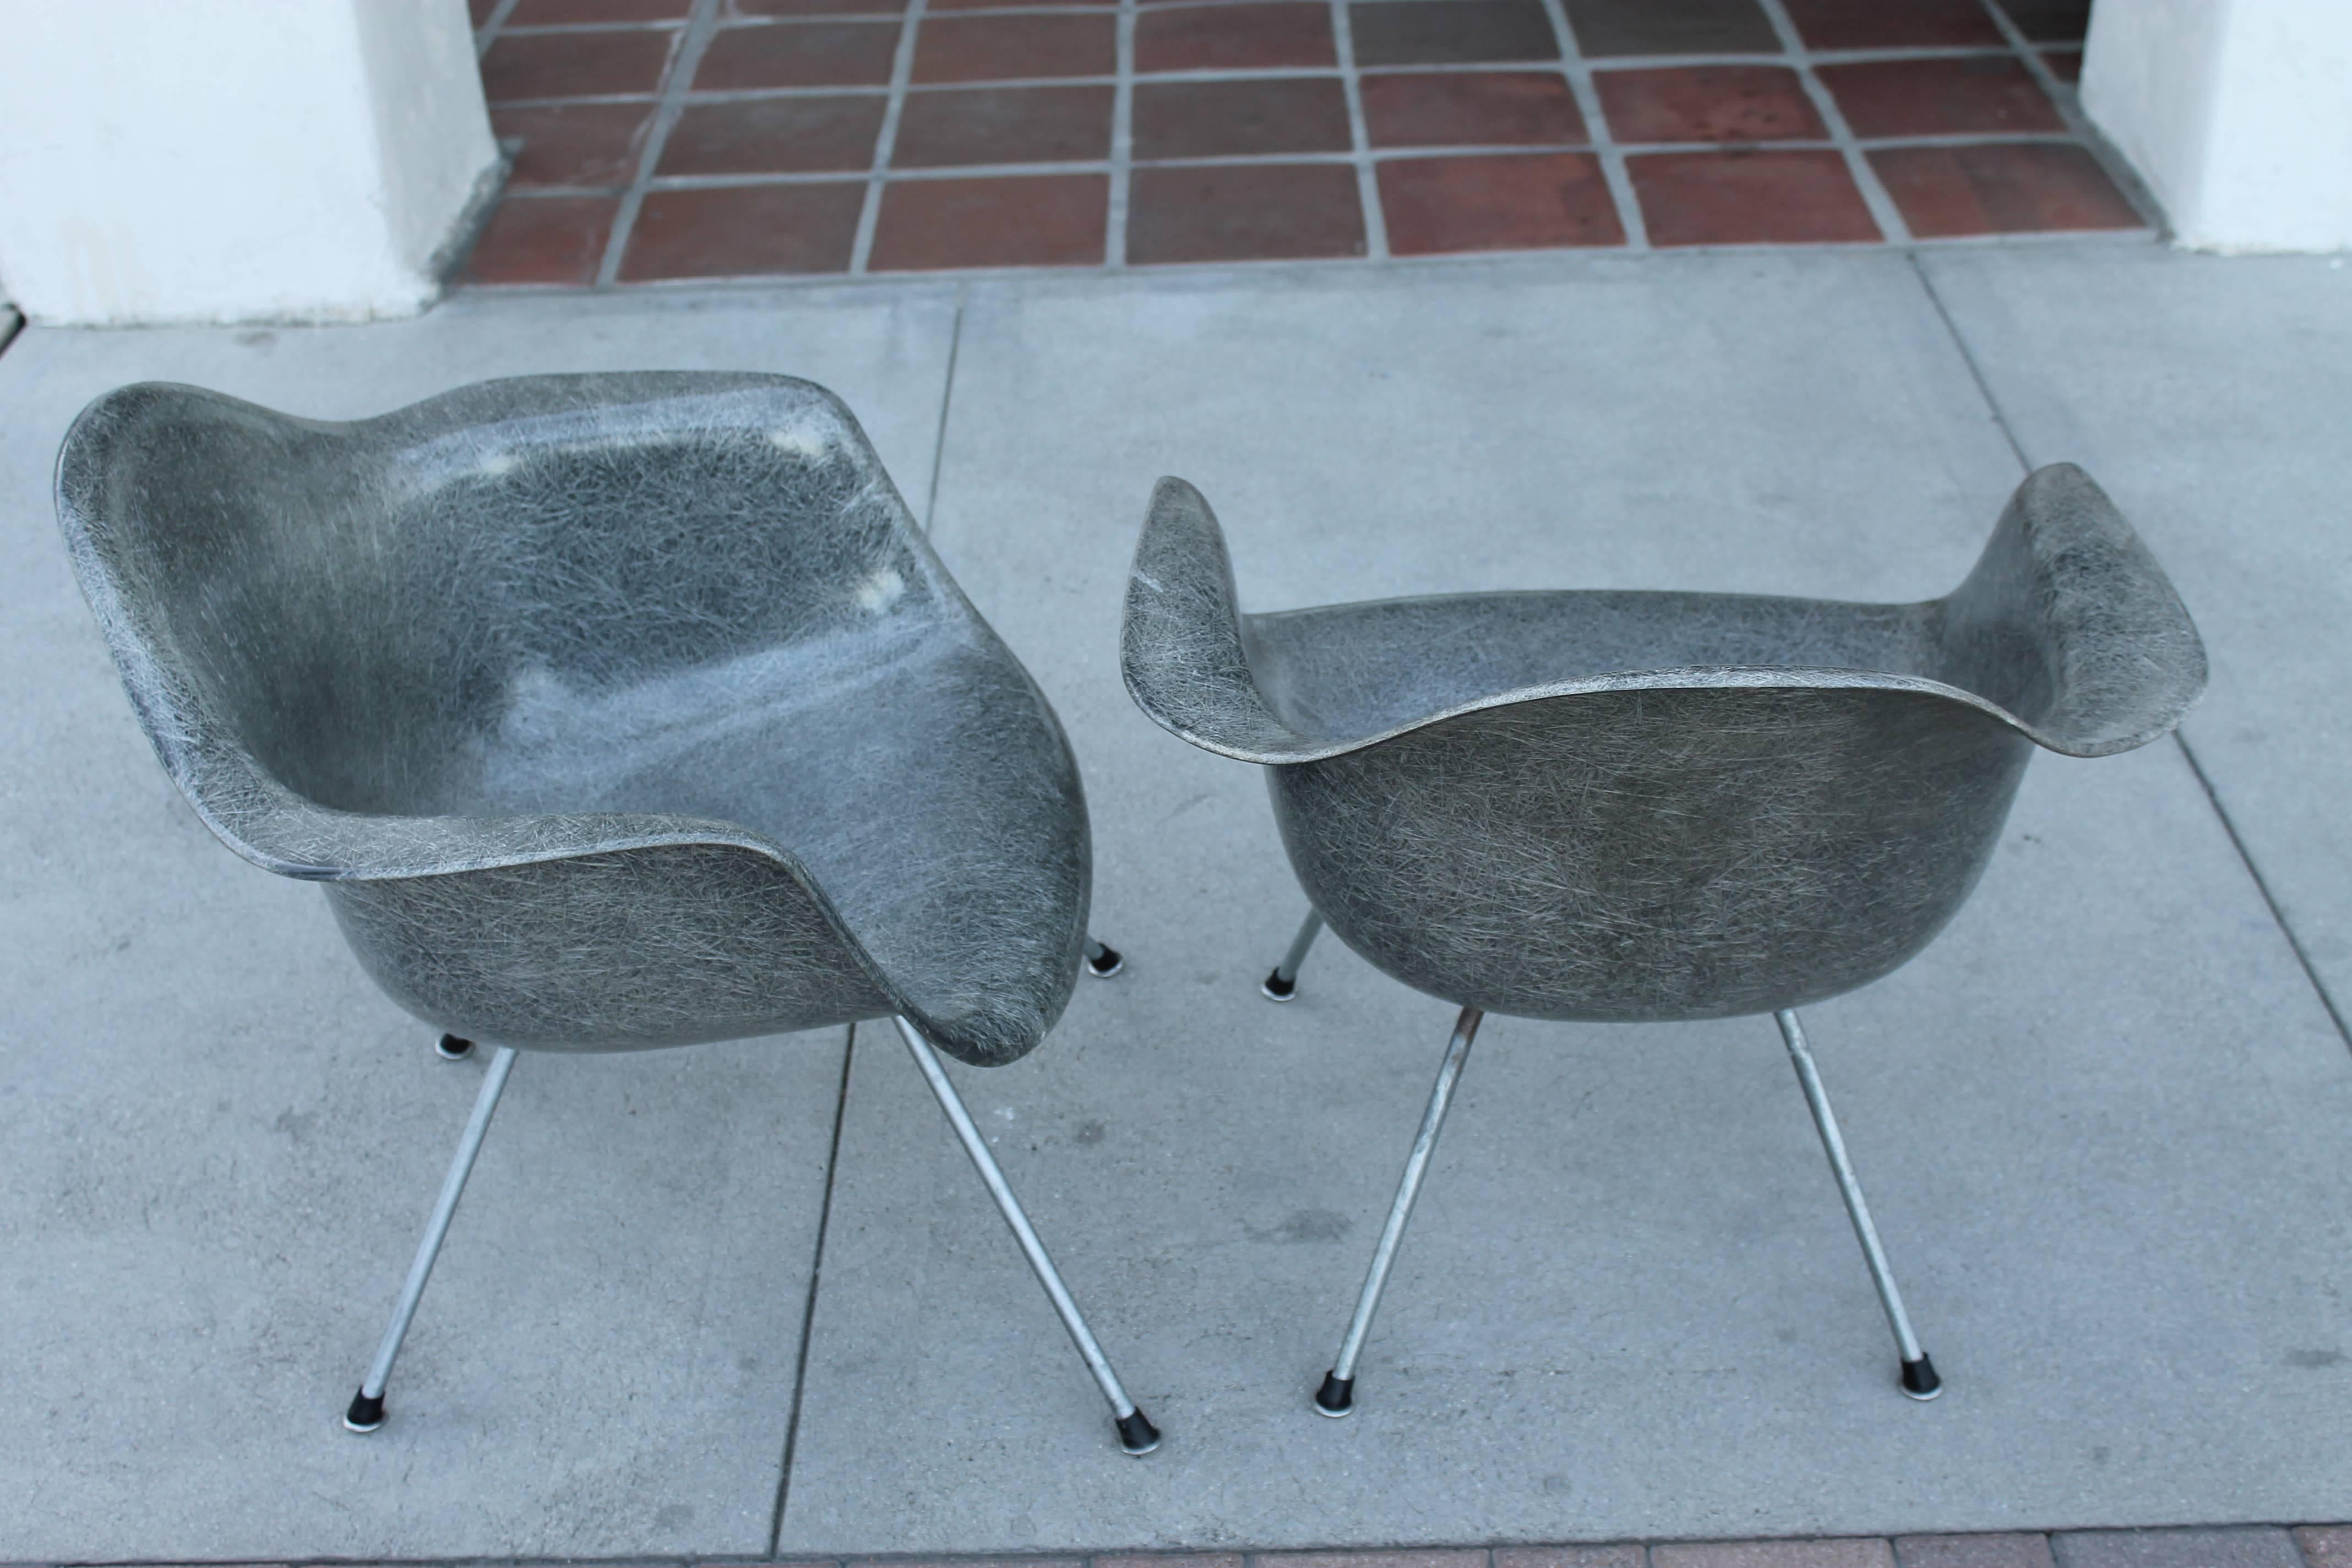 Pair of Ray and Charles Eames fiberglass bucket chairs. These are the early ones with the rope edging in elephant hide grey color.  Considered the first year of production.  One of the chairs has the early Zenith label. I rarely see these examples